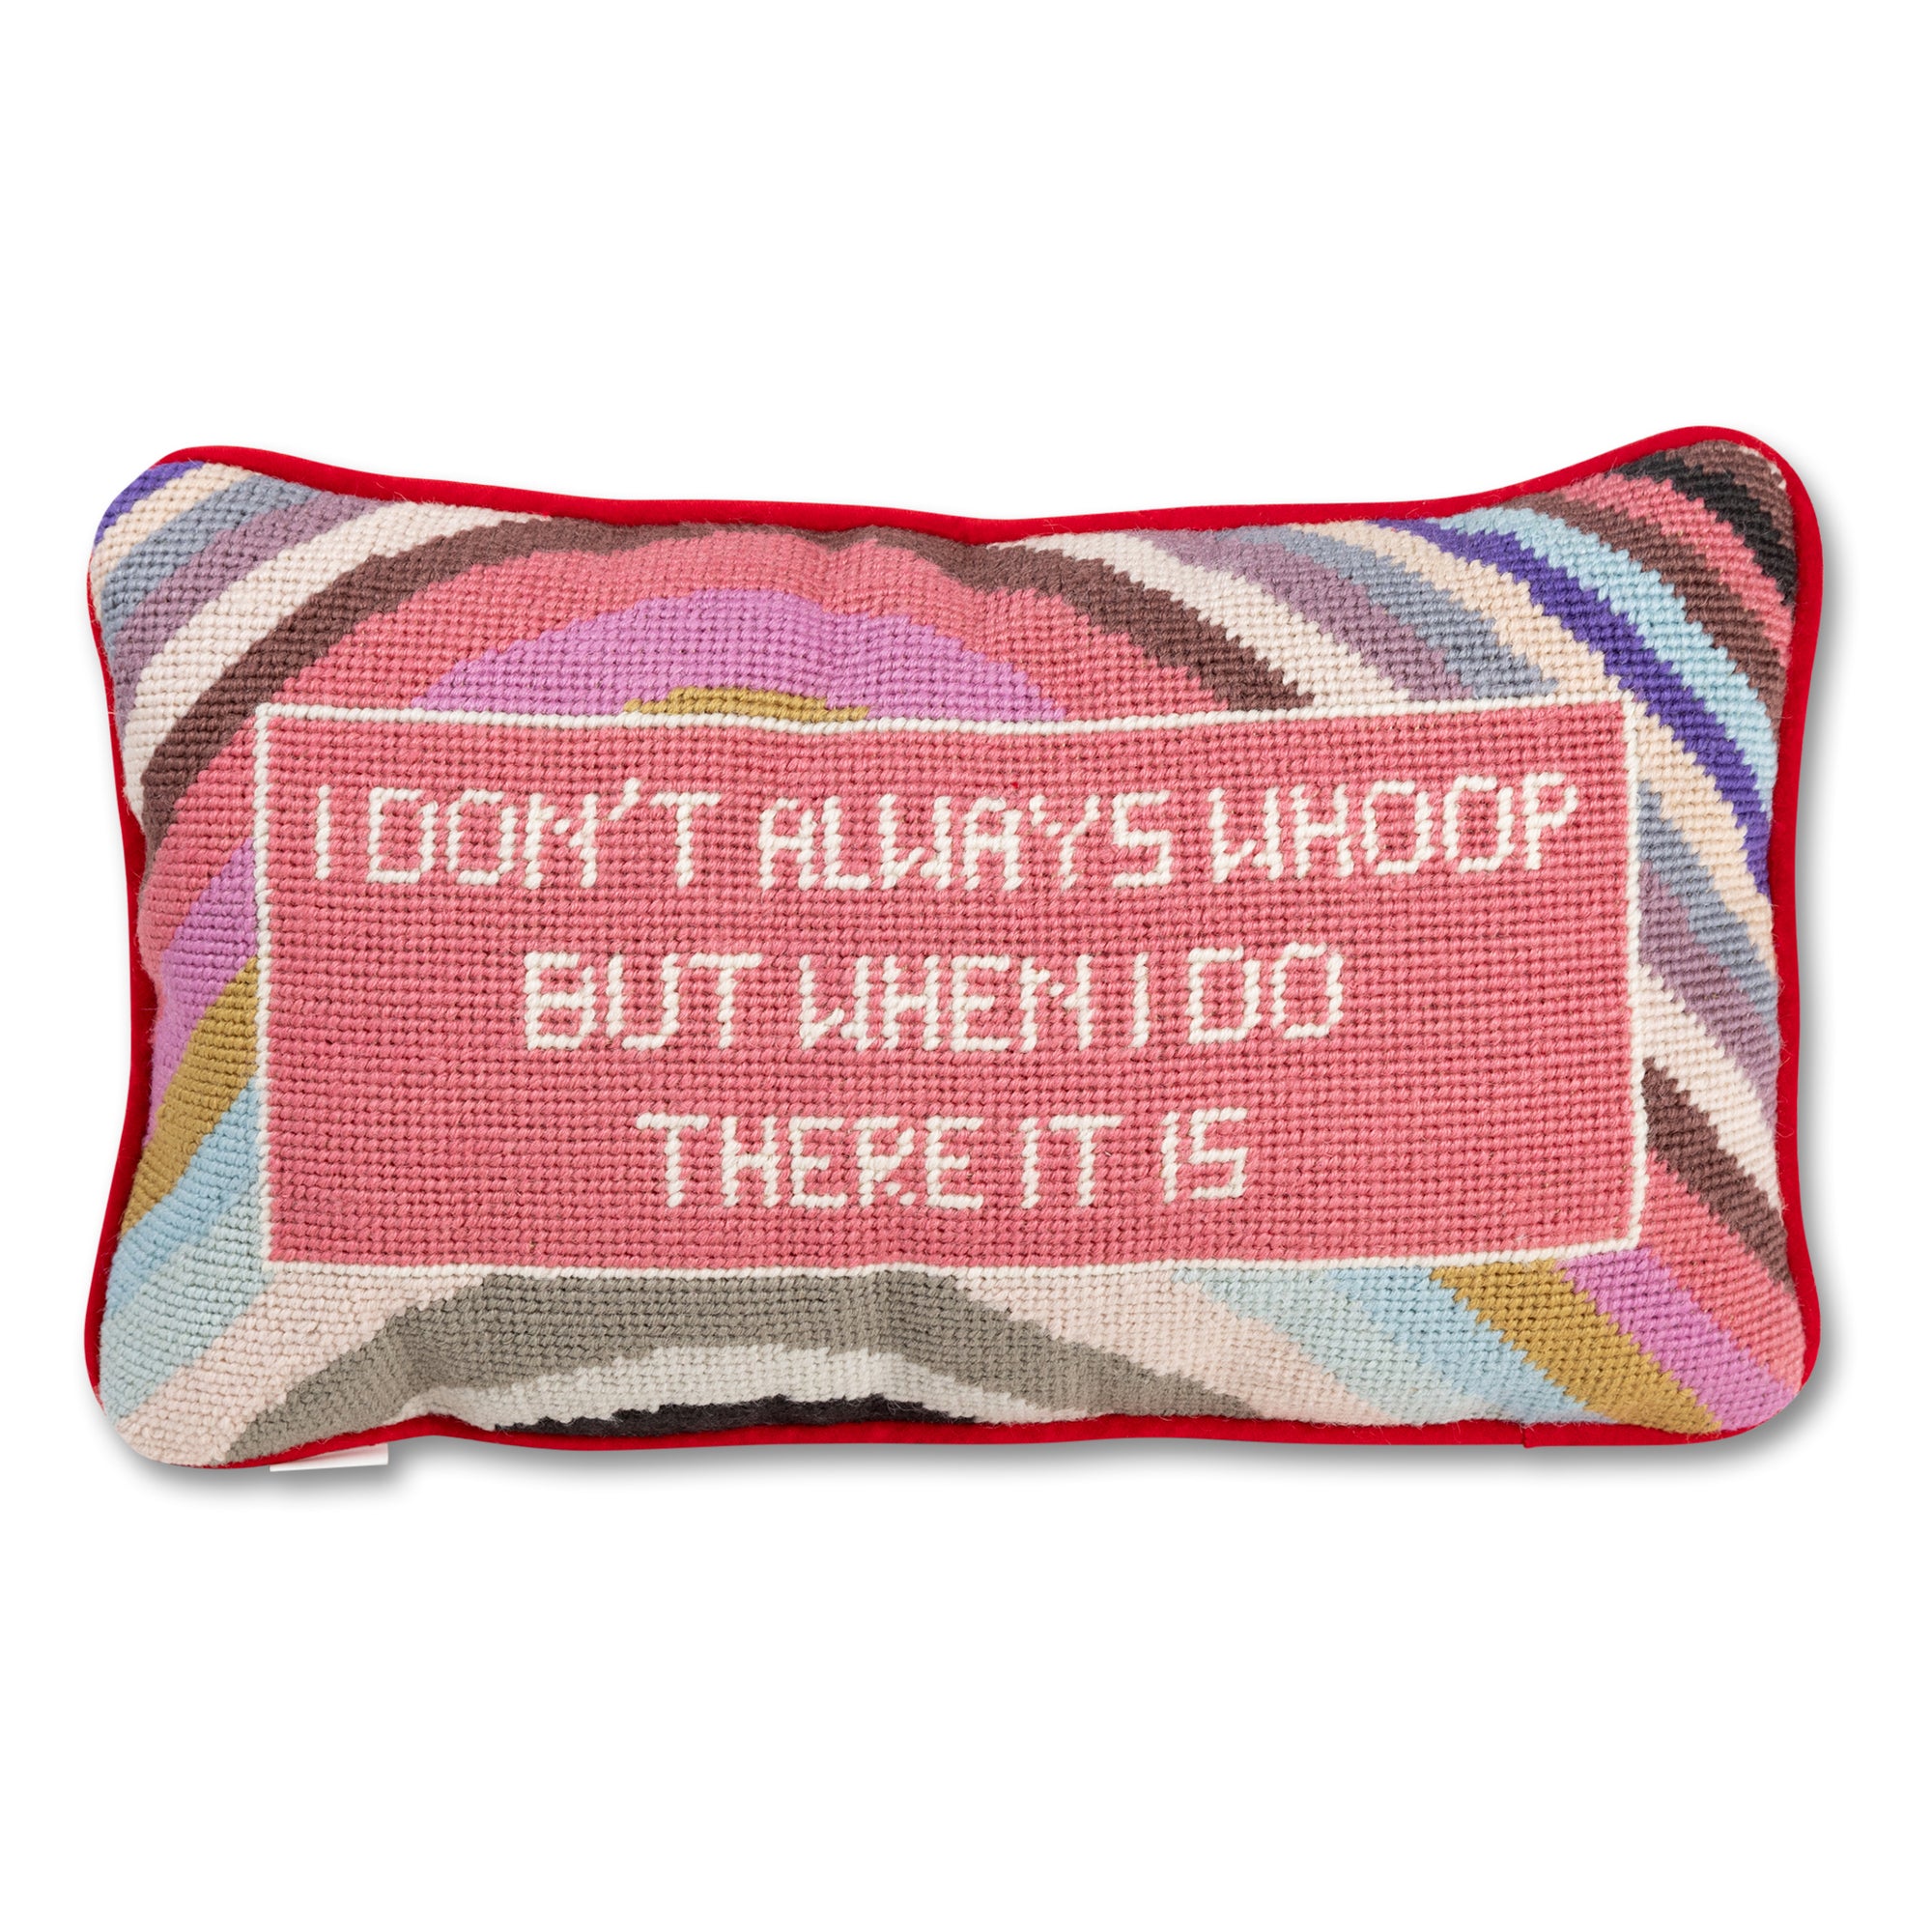 Needlepoint Pillow - Whoop There It Is